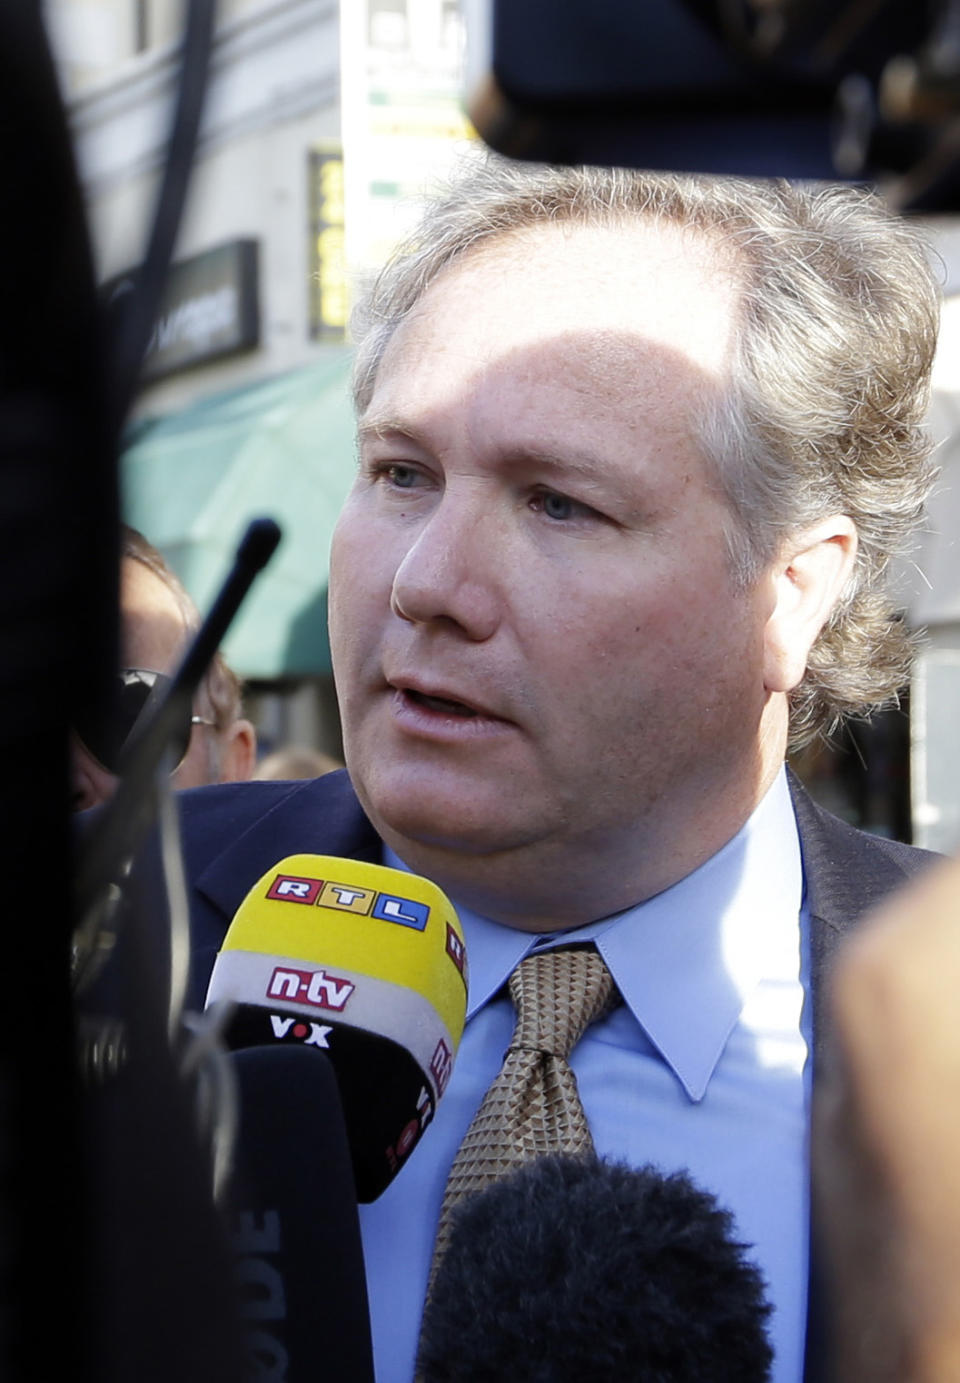 Lawyer John Arthur Eaves, representing a group of Costa Concordia survivors, is interviewed outside Teatro Moderno theater where the first hearing of the trial for the Jan. 13, 2012 tragedy, where 32 people died after the luxury cruise Costa Concordia was forced to evacuate some 4,200 passengers after it hit a rock while passing too close to the Giglio Island, is taking place, in Grosseto, Italy, Monday Oct. 15, 2012. (AP Photo/Gregorio Borgia)